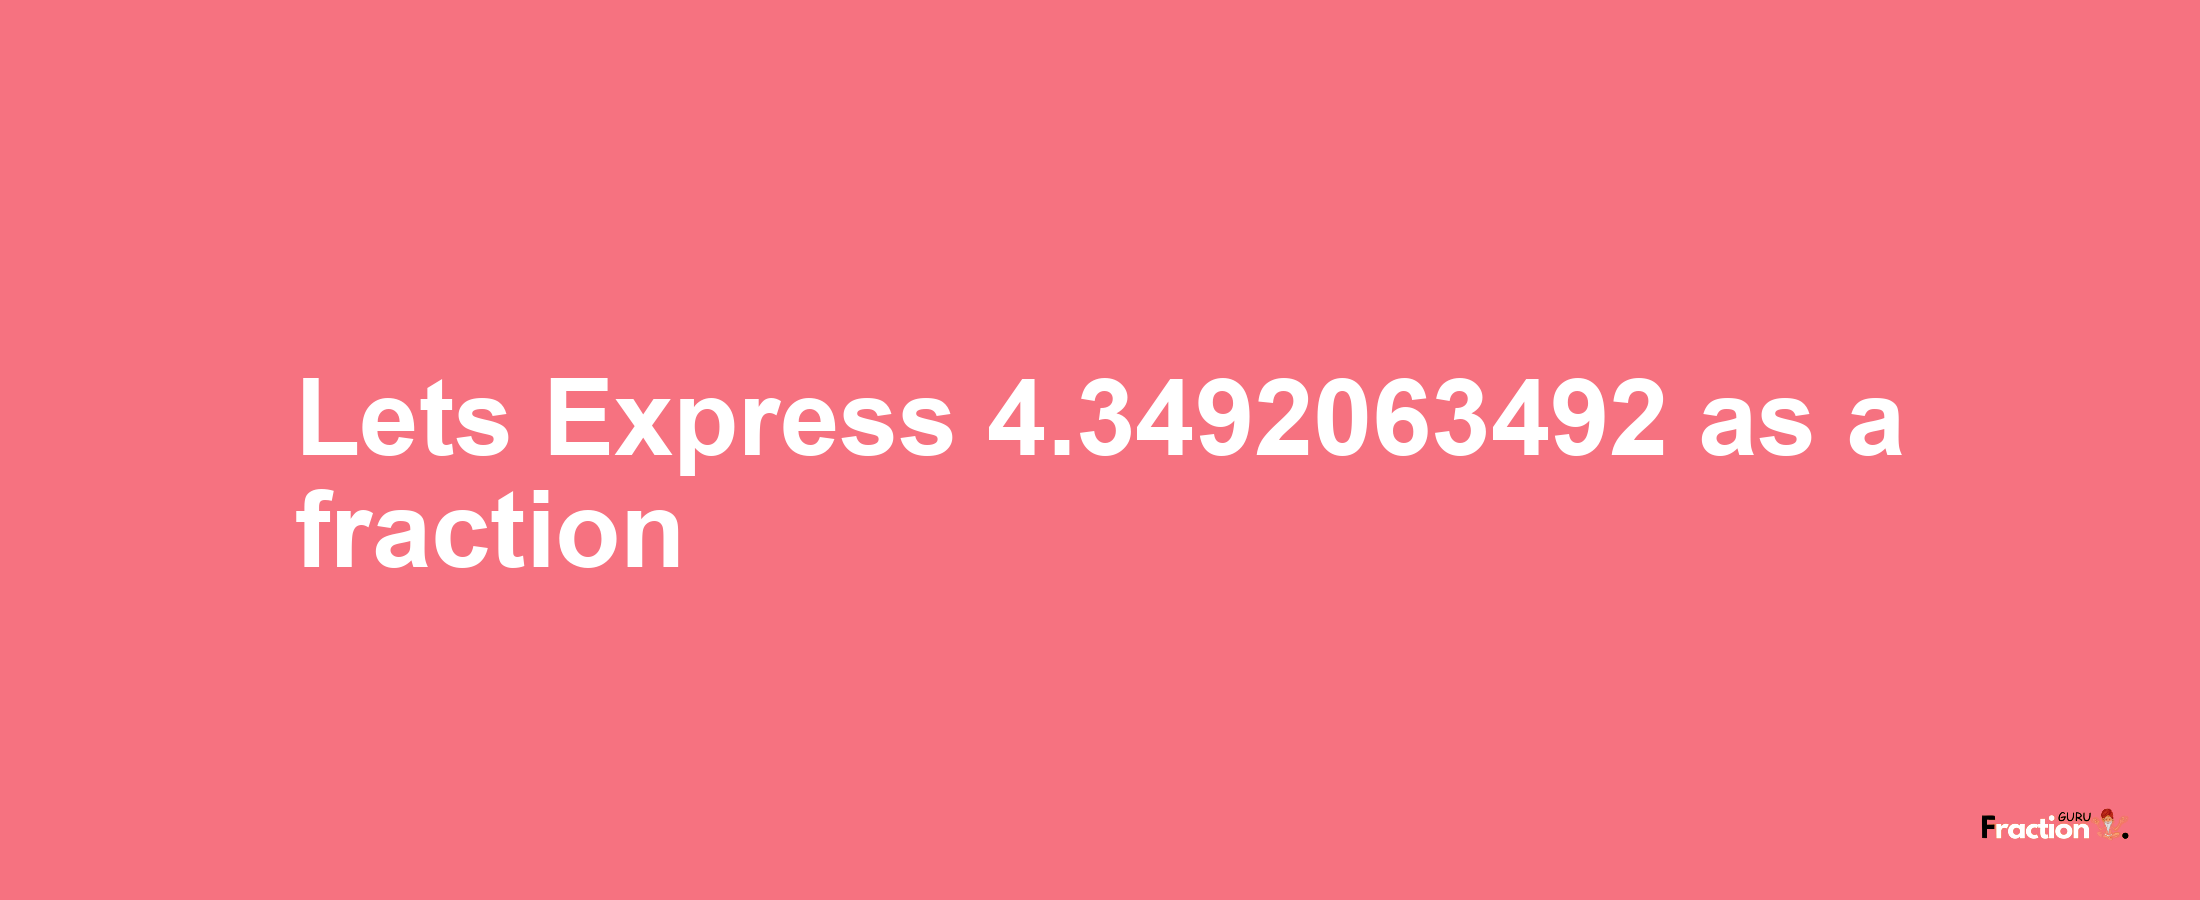 Lets Express 4.3492063492 as afraction